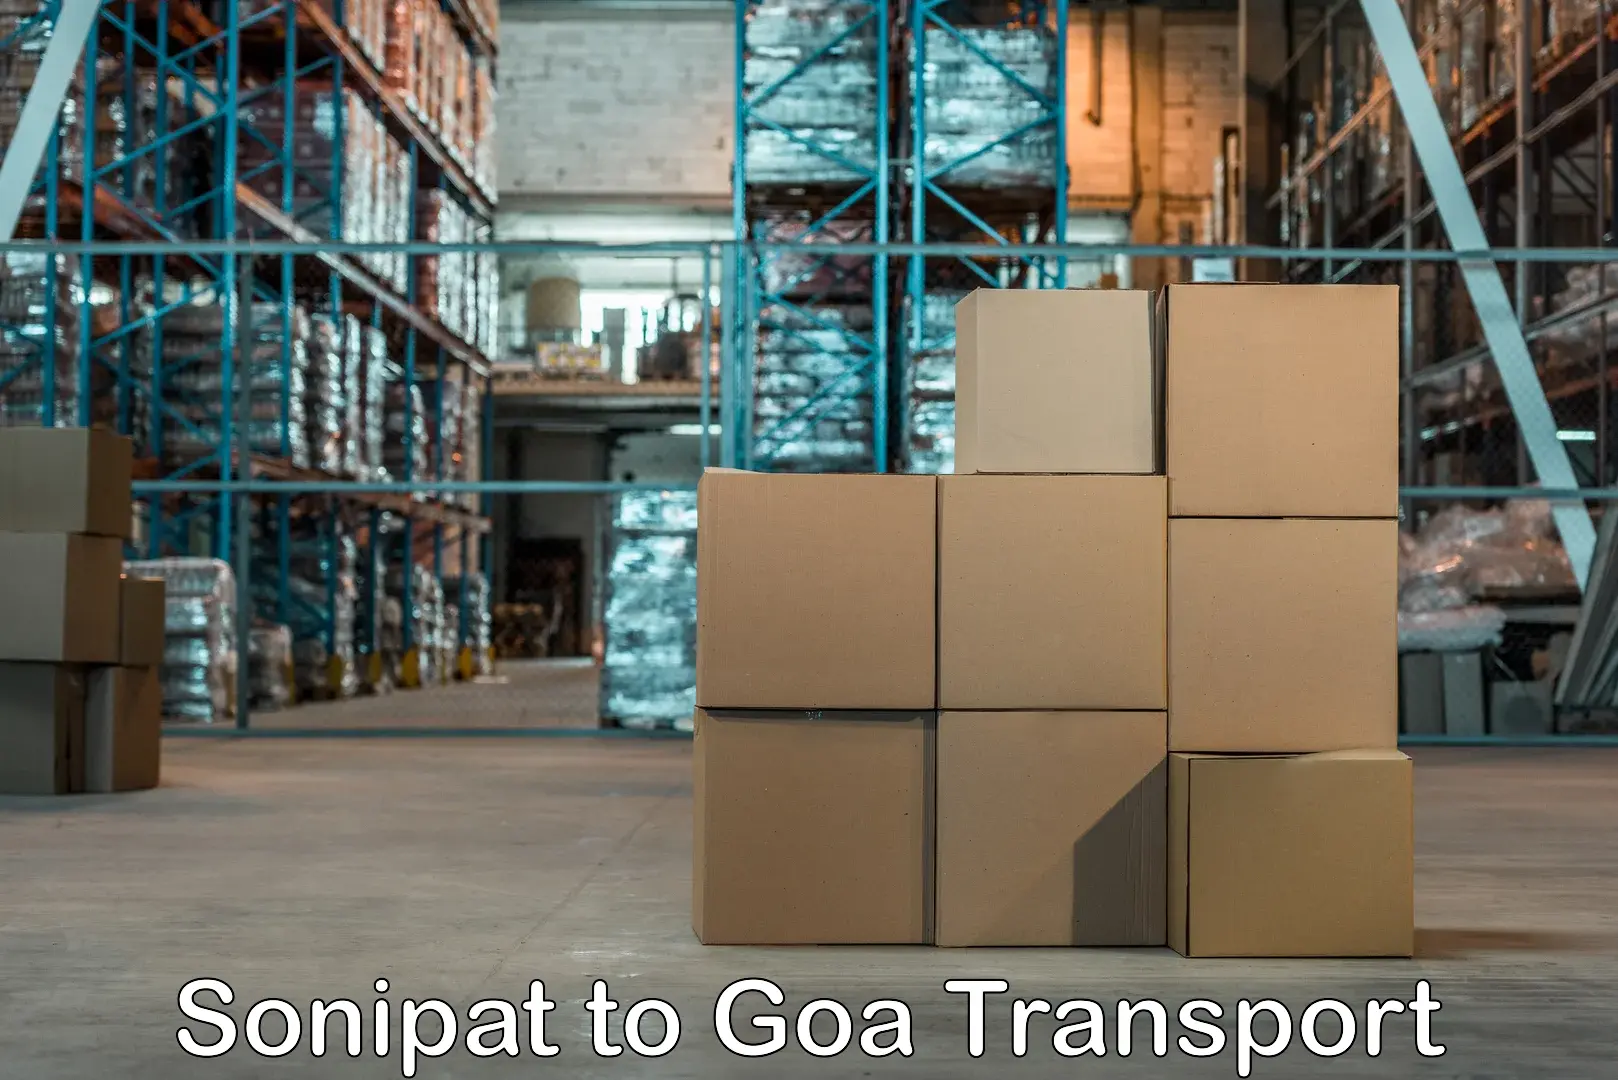 Daily transport service Sonipat to NIT Goa